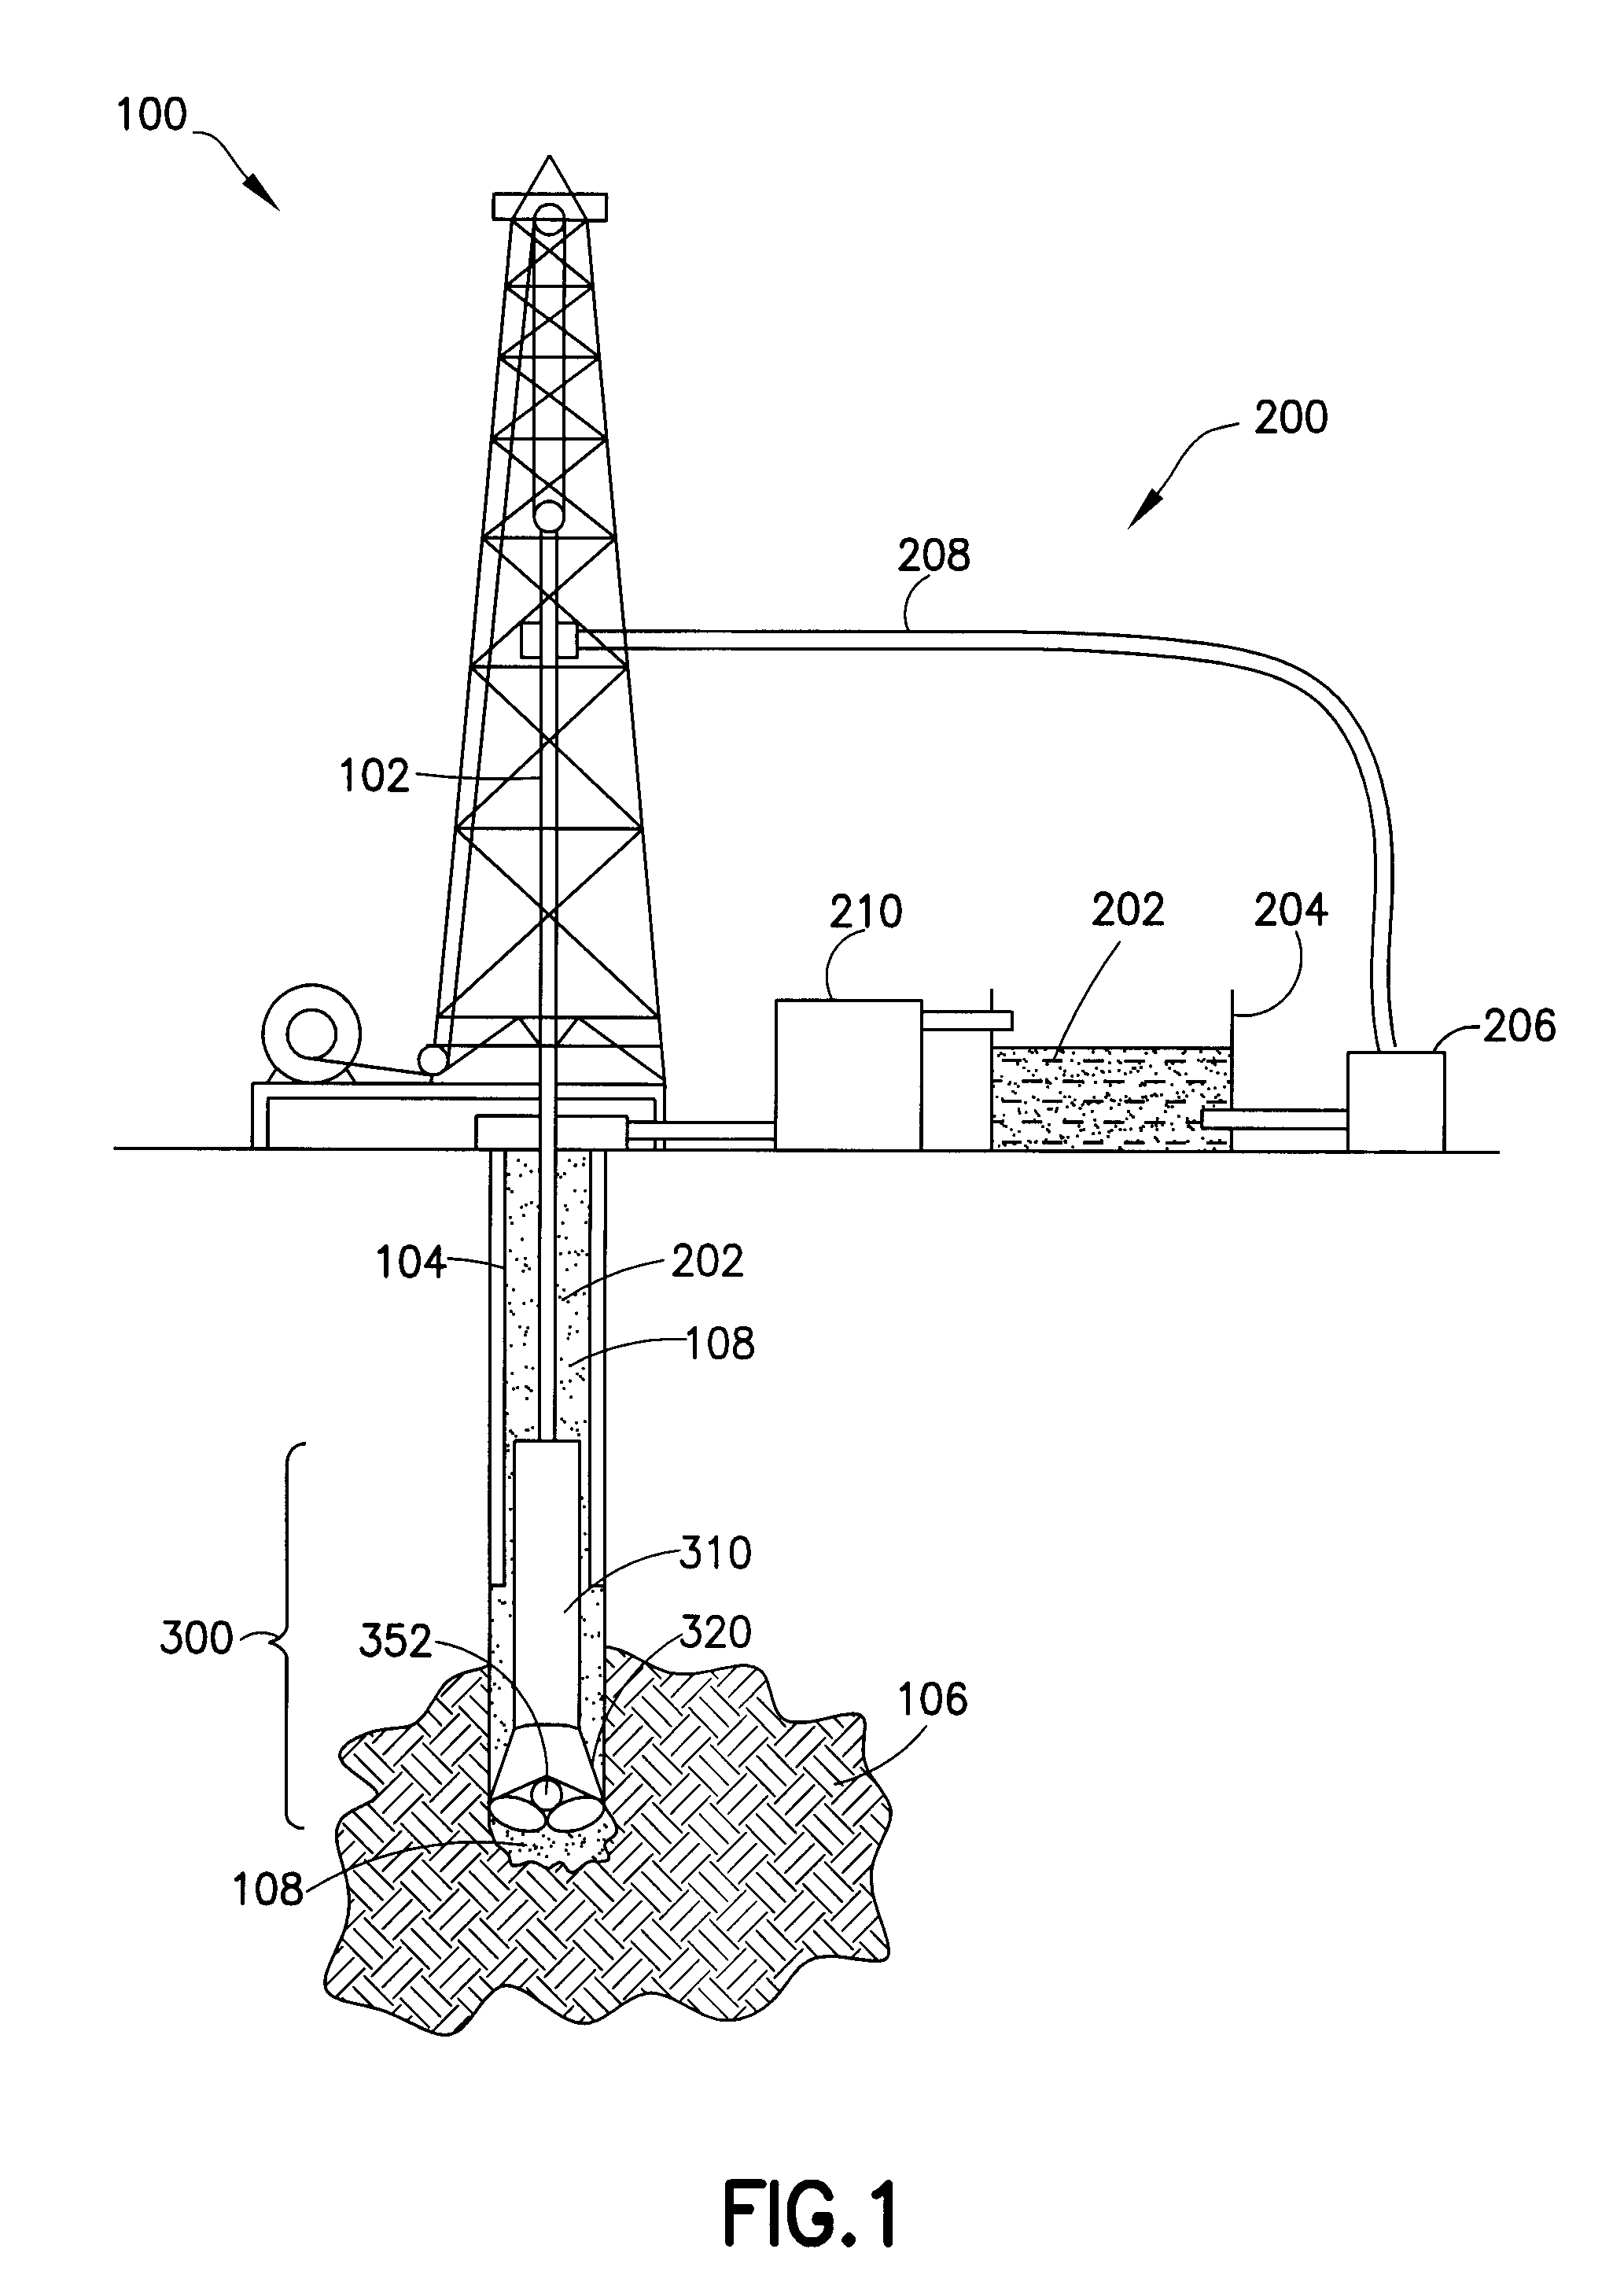 Erosion resistant surface and method of making erosion resistant surfaces